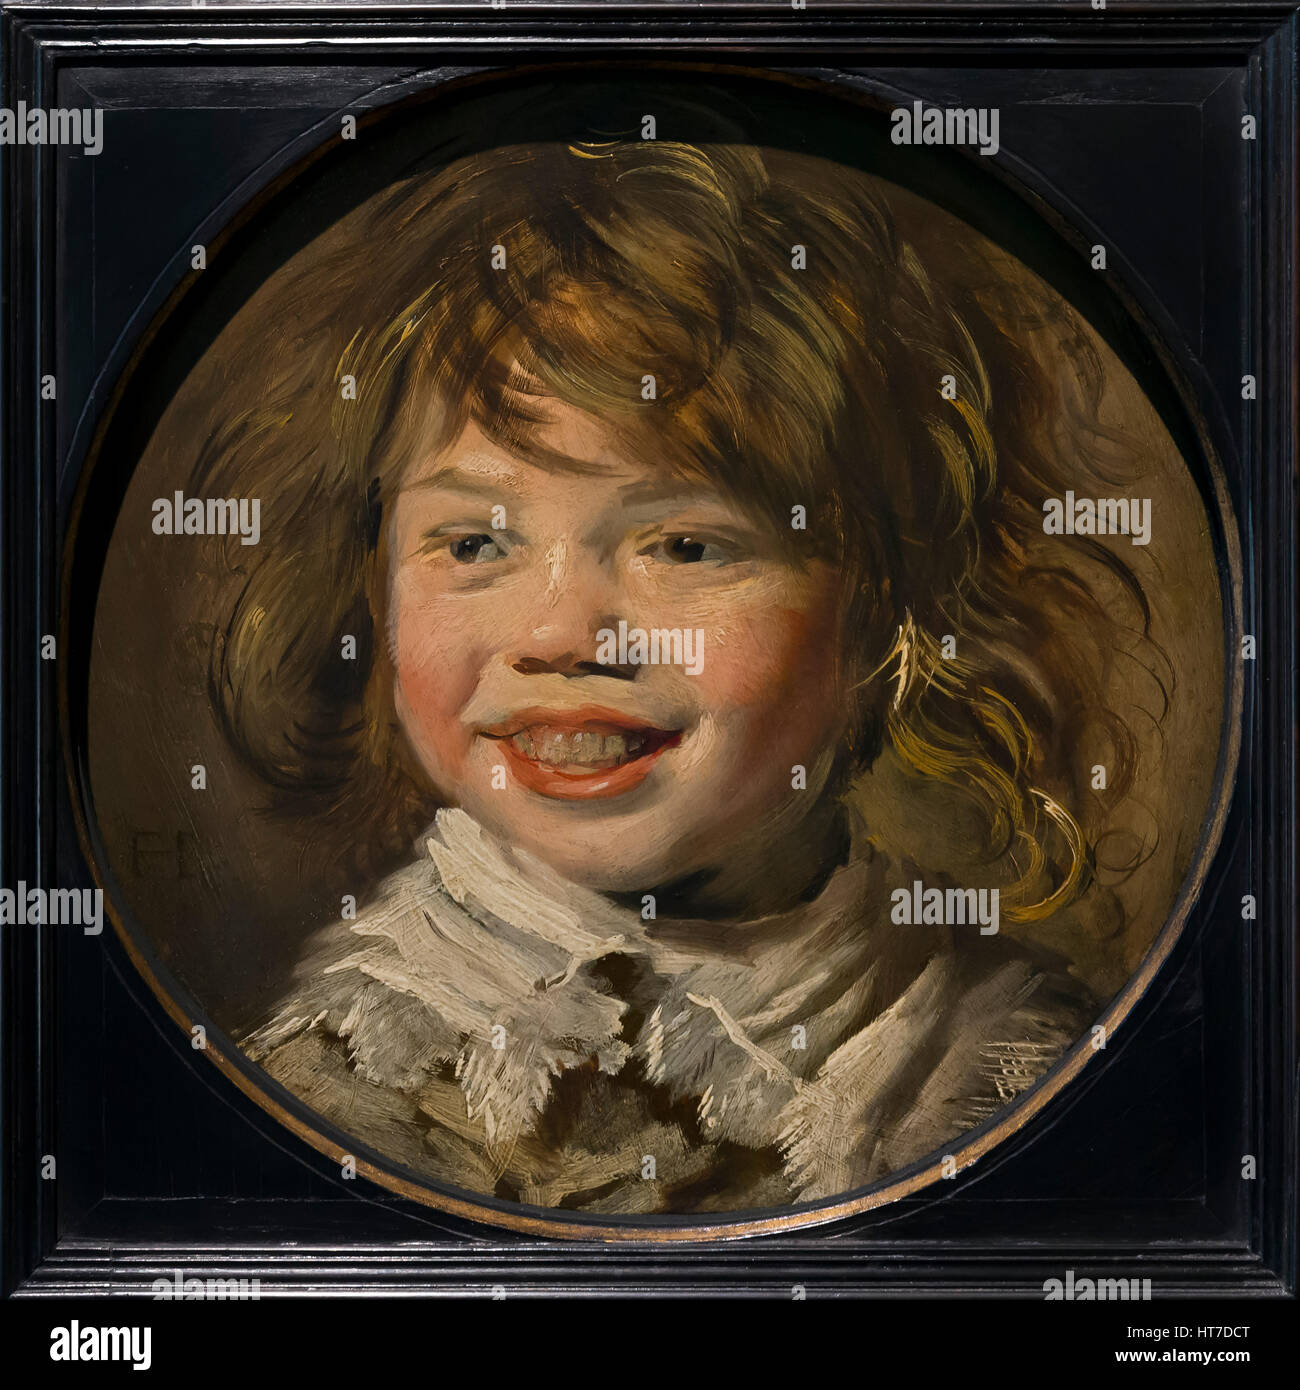 Laughing Boy, by Frans Hals, circa 1625, Royal Art Gallery, Mauritshuis Museum, The Hague, Netherlands, Europe Stock Photo